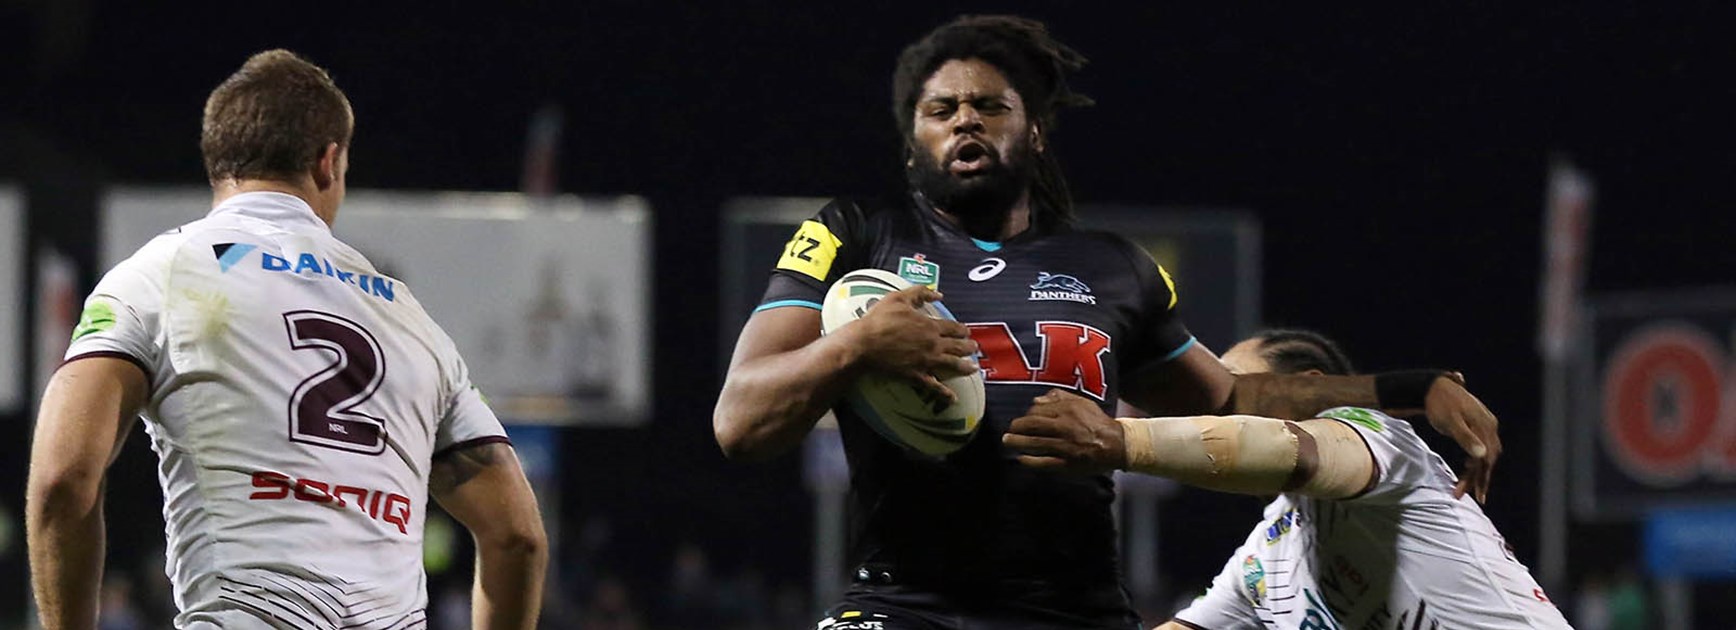 Jamal Idris in action for Penrith before being injured in Round 6 against Manly.